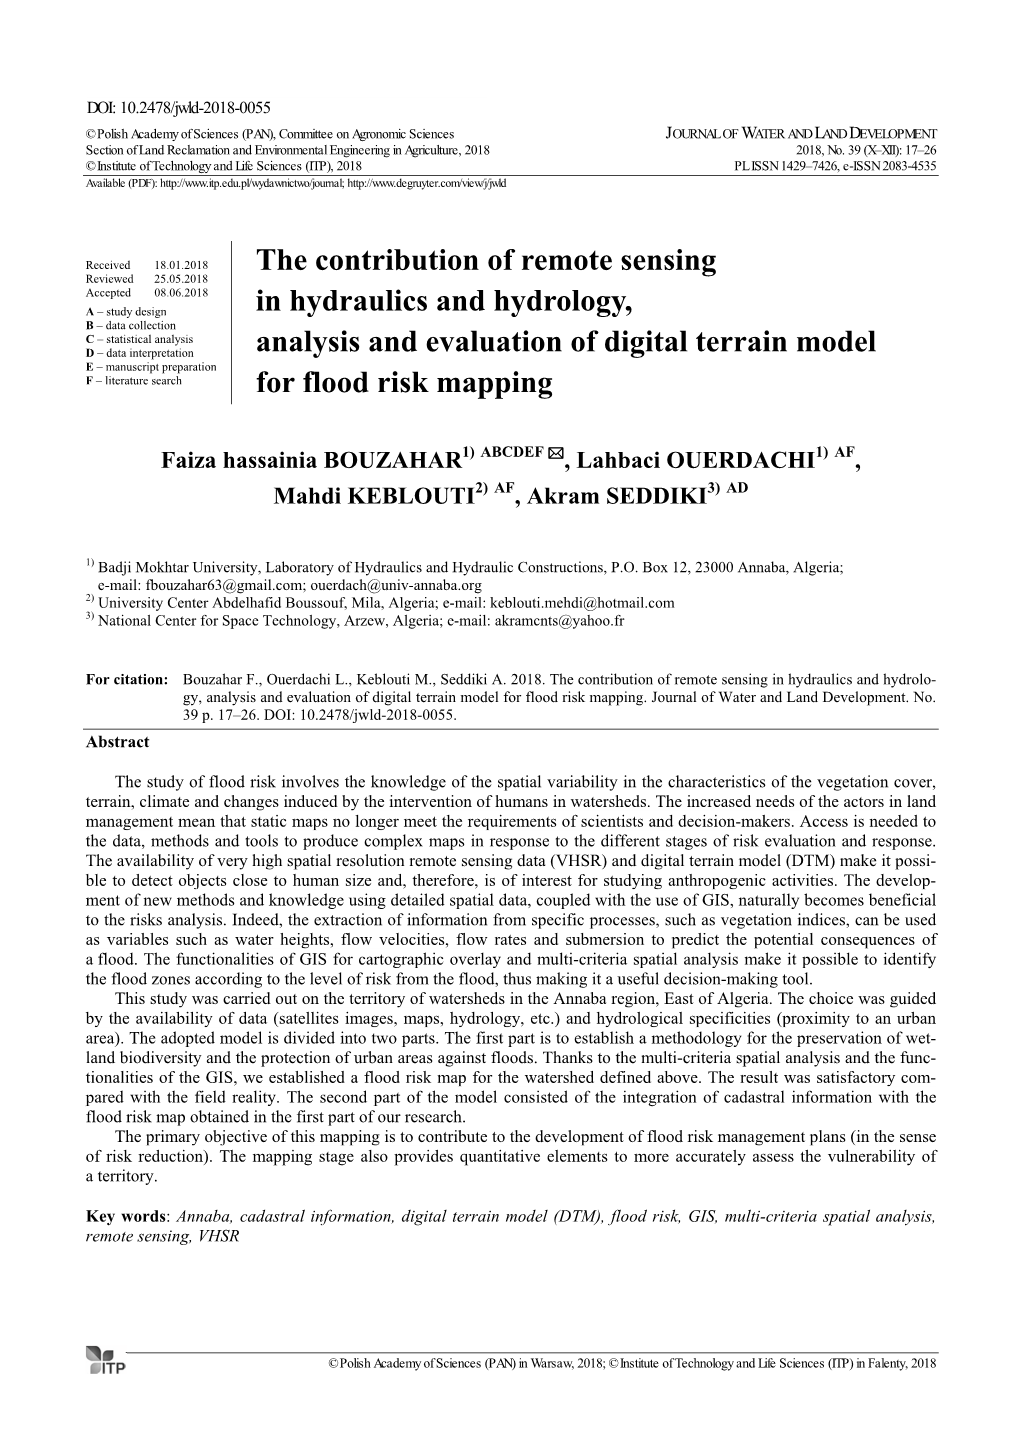 The Contribution of Remote Sensing in Hydraulics and Hydrology, Analysis and Evaluation of Digital Terrain Model for Flood Ri